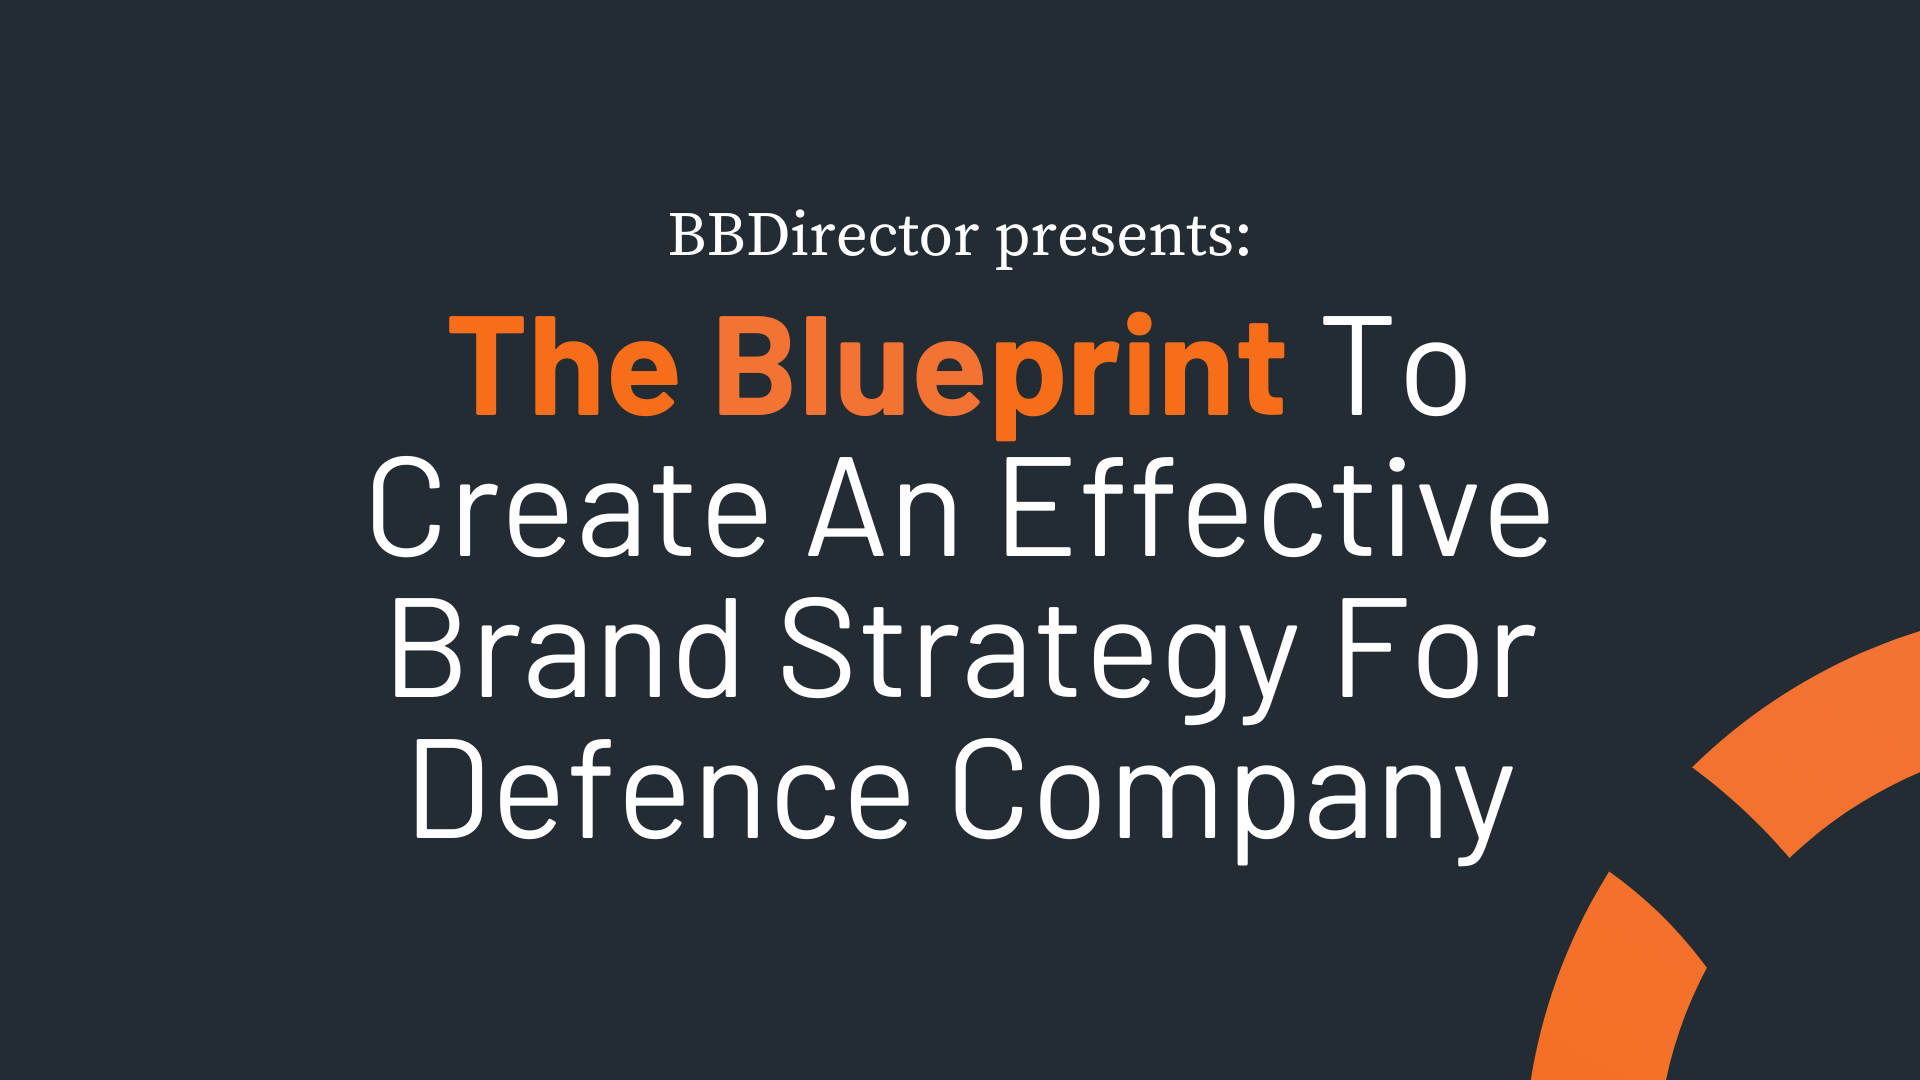 Brand strategy for defence company